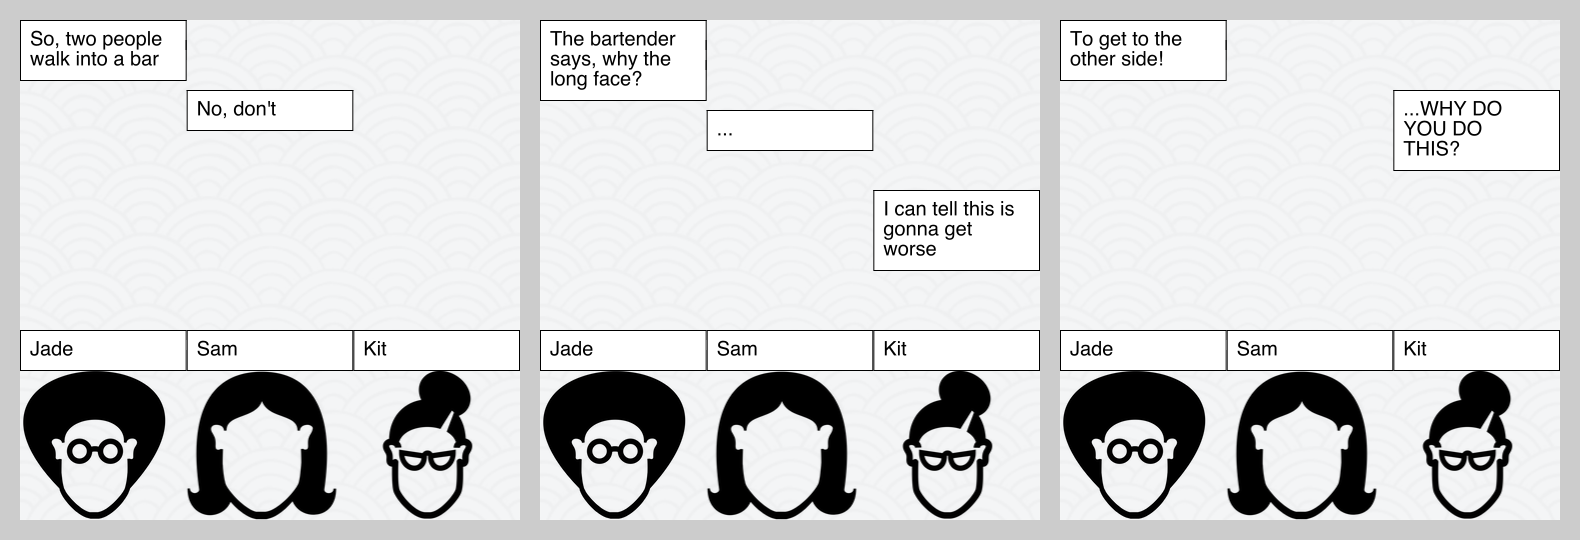 Preview with a comic that is three panels, each person has a randomly generated face with text above each face indicating who says what. The comic tells a story of a bad joke being told and the other characters reacting to the bad joke.